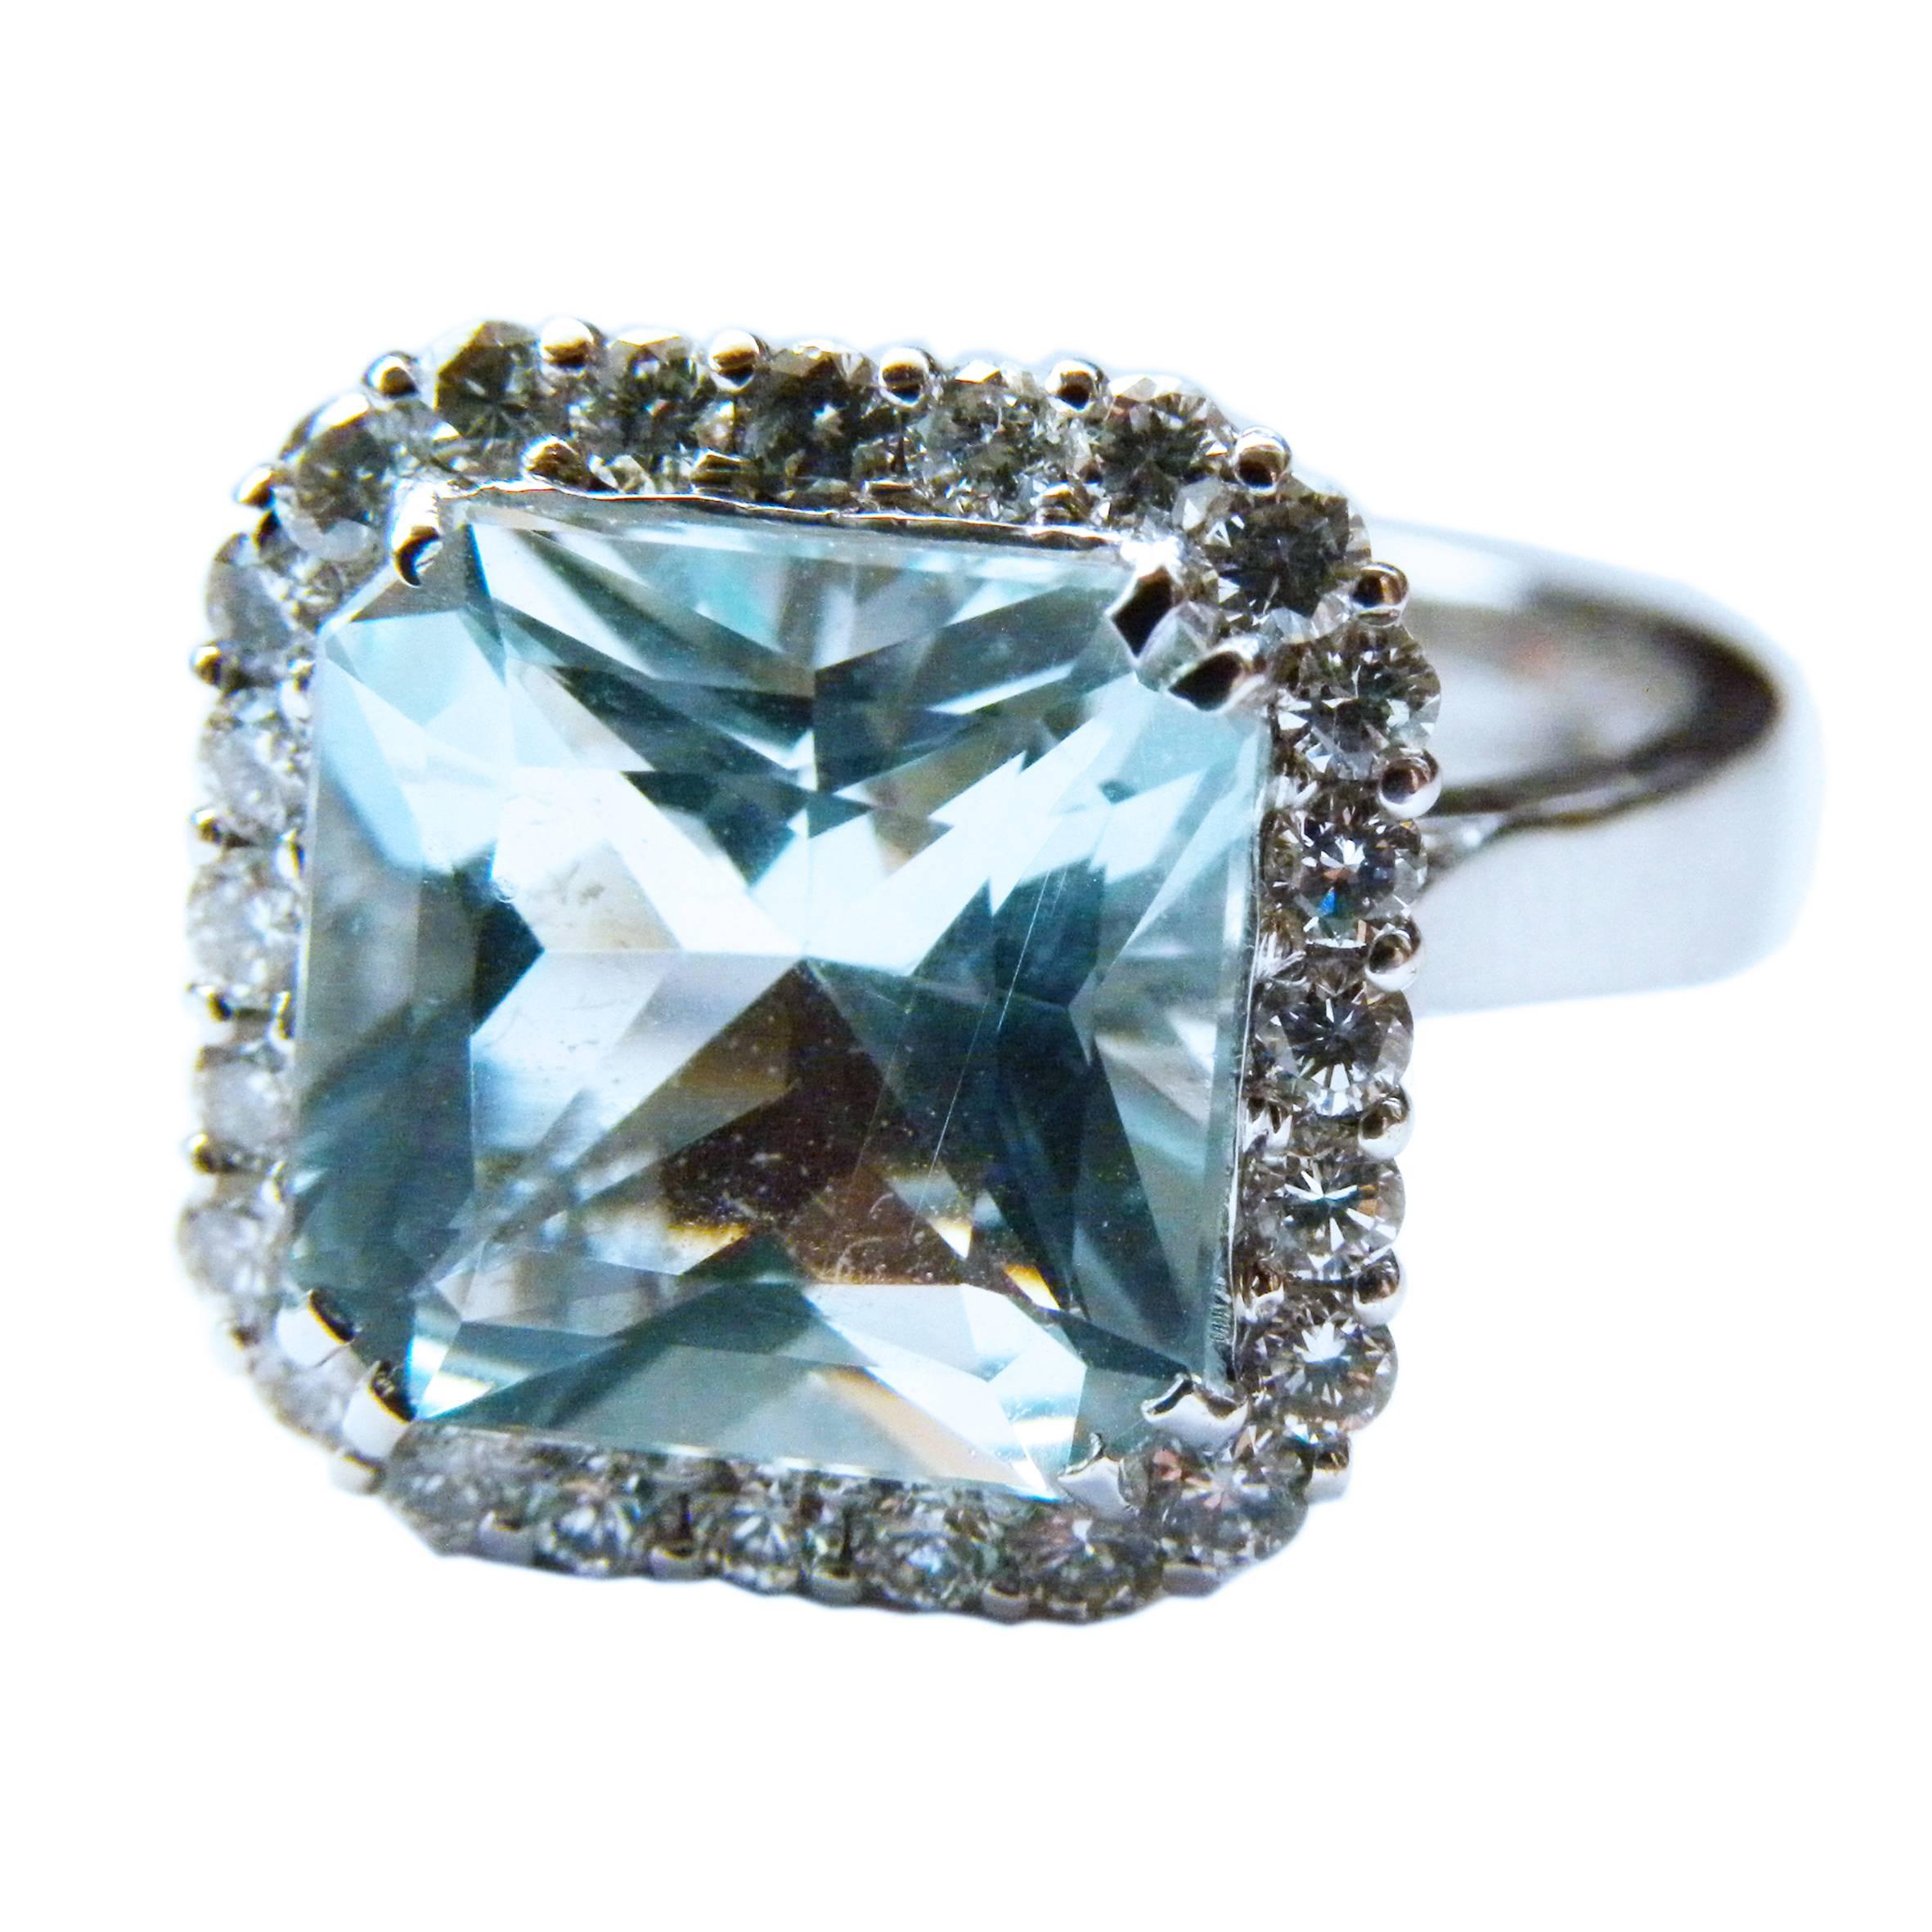 Chic and Timeless 3.67 Carat Natural Brazilian Aquamarine Pricess Cut in a 0.51 Carat White Diamond Setting Engagement or Cocktail Ring.
In our fitted burgundy leather case.
A detailed Gemmological Certificate is included.

US size 6 French size